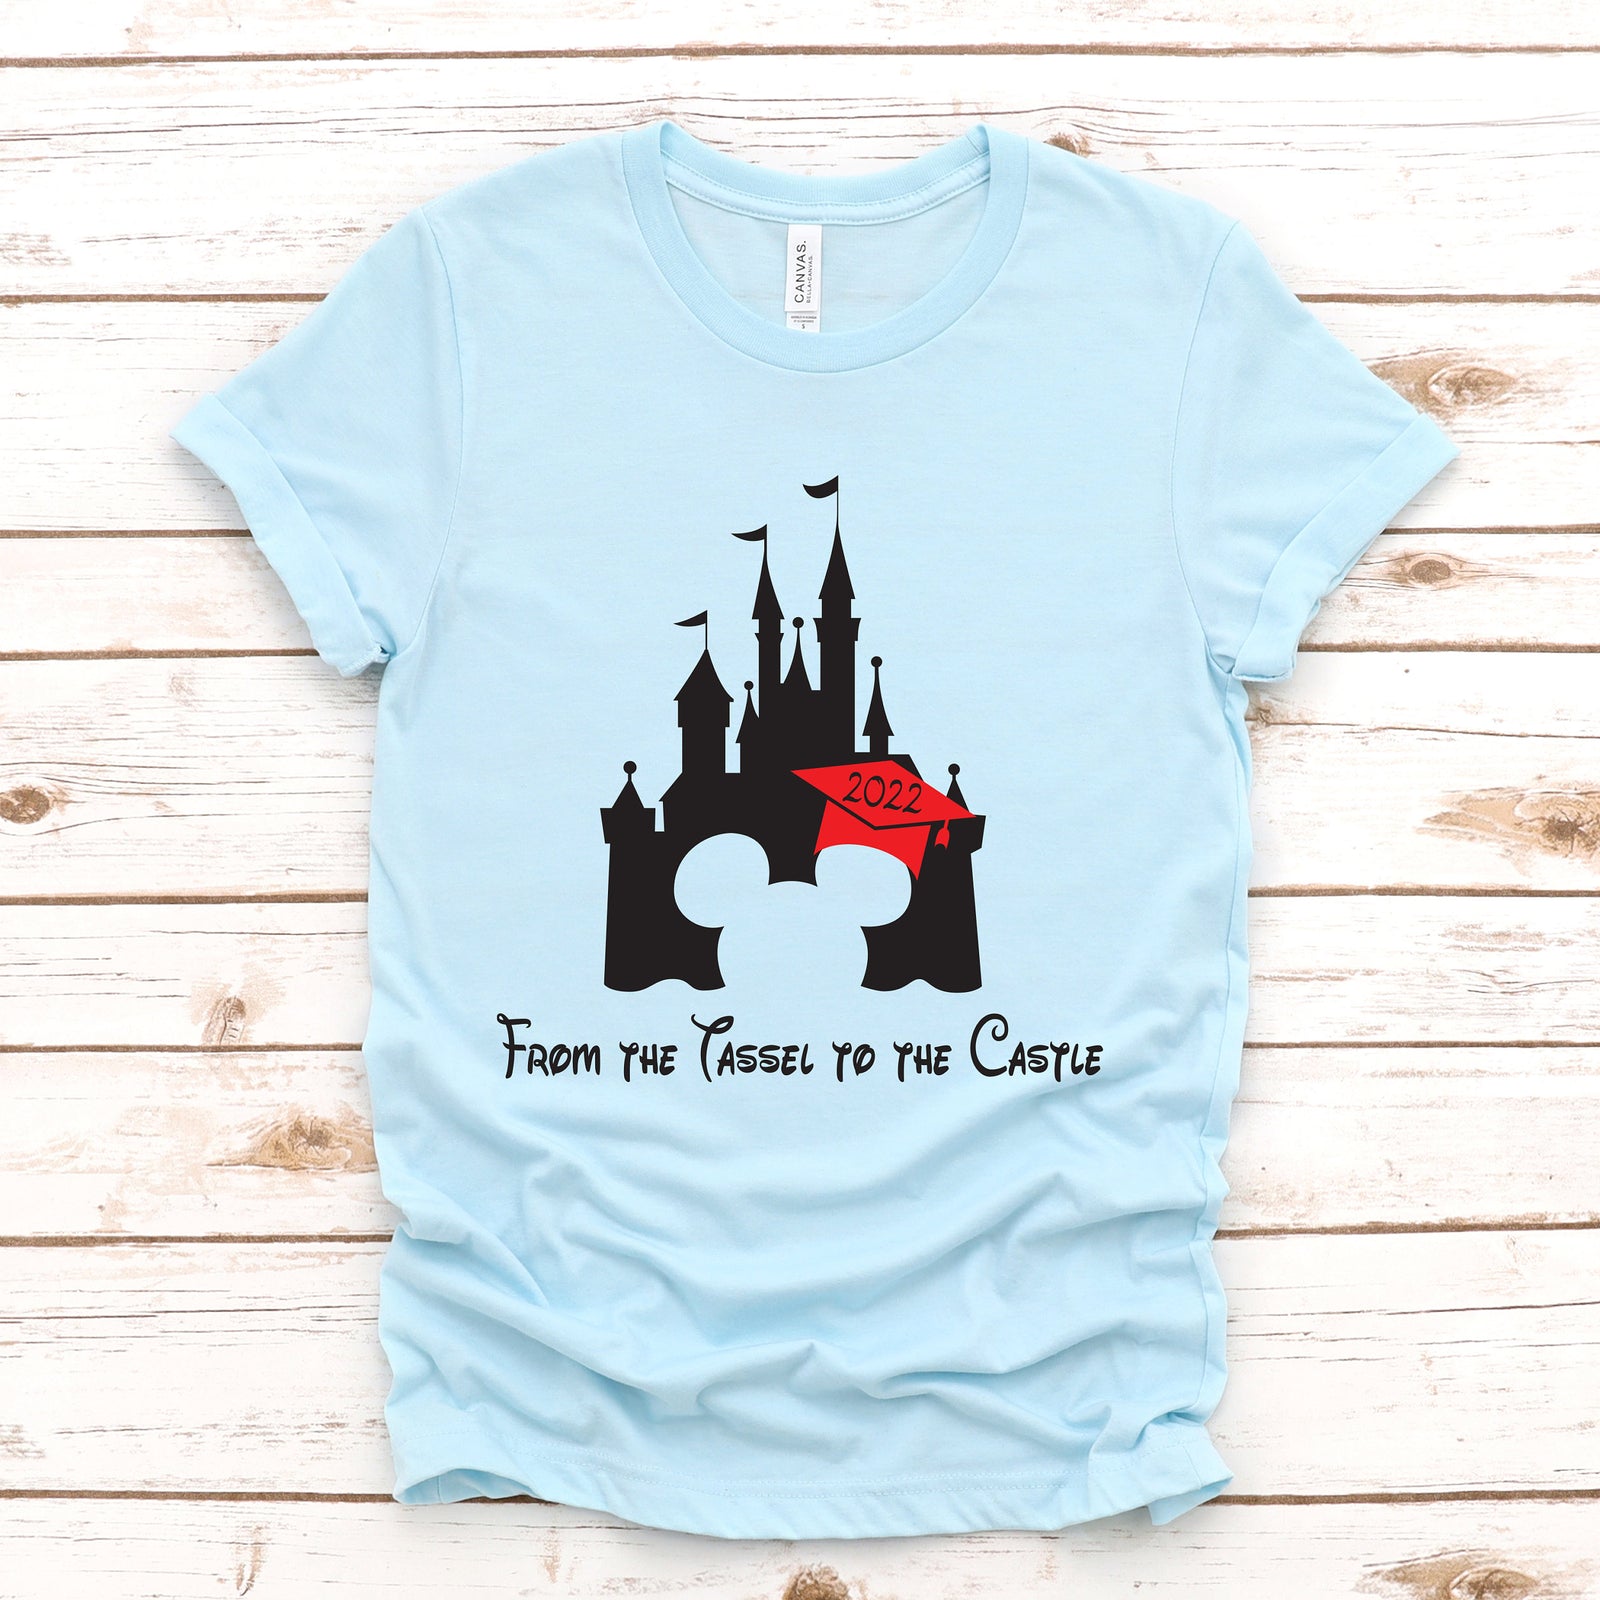 From the Tassel to the Castle - Disney Graduation Trip Shirts - Seniors - Class of 2022 - Unisex Adult Shirts - Personalized